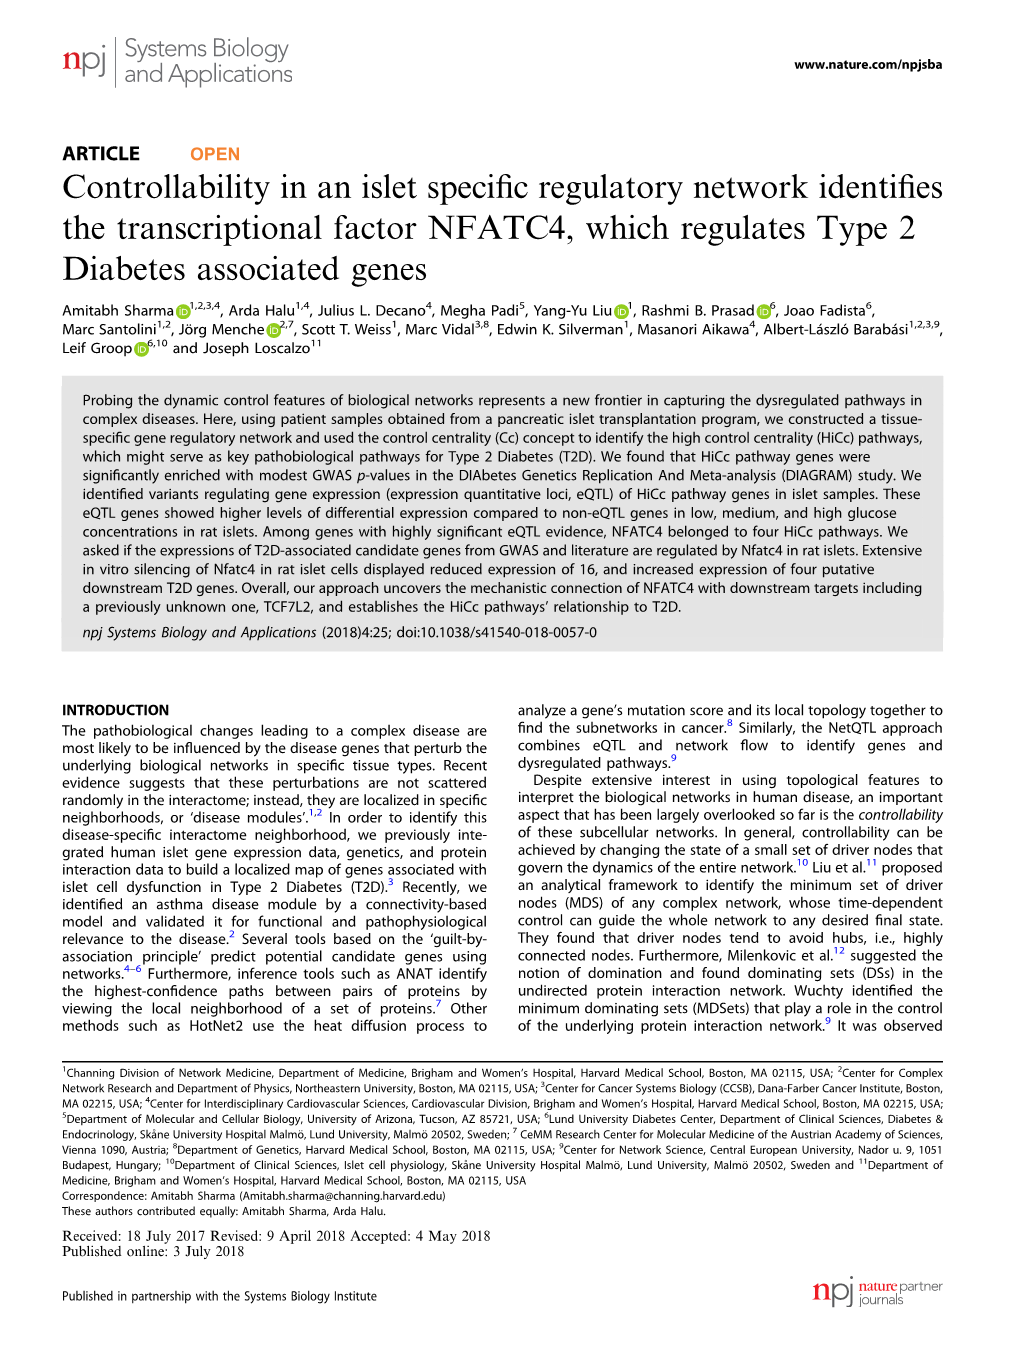 Controllability in an Islet Specific Regulatory Network Identifies the Transcriptional Factor NFATC4, Which Regulates Type 2